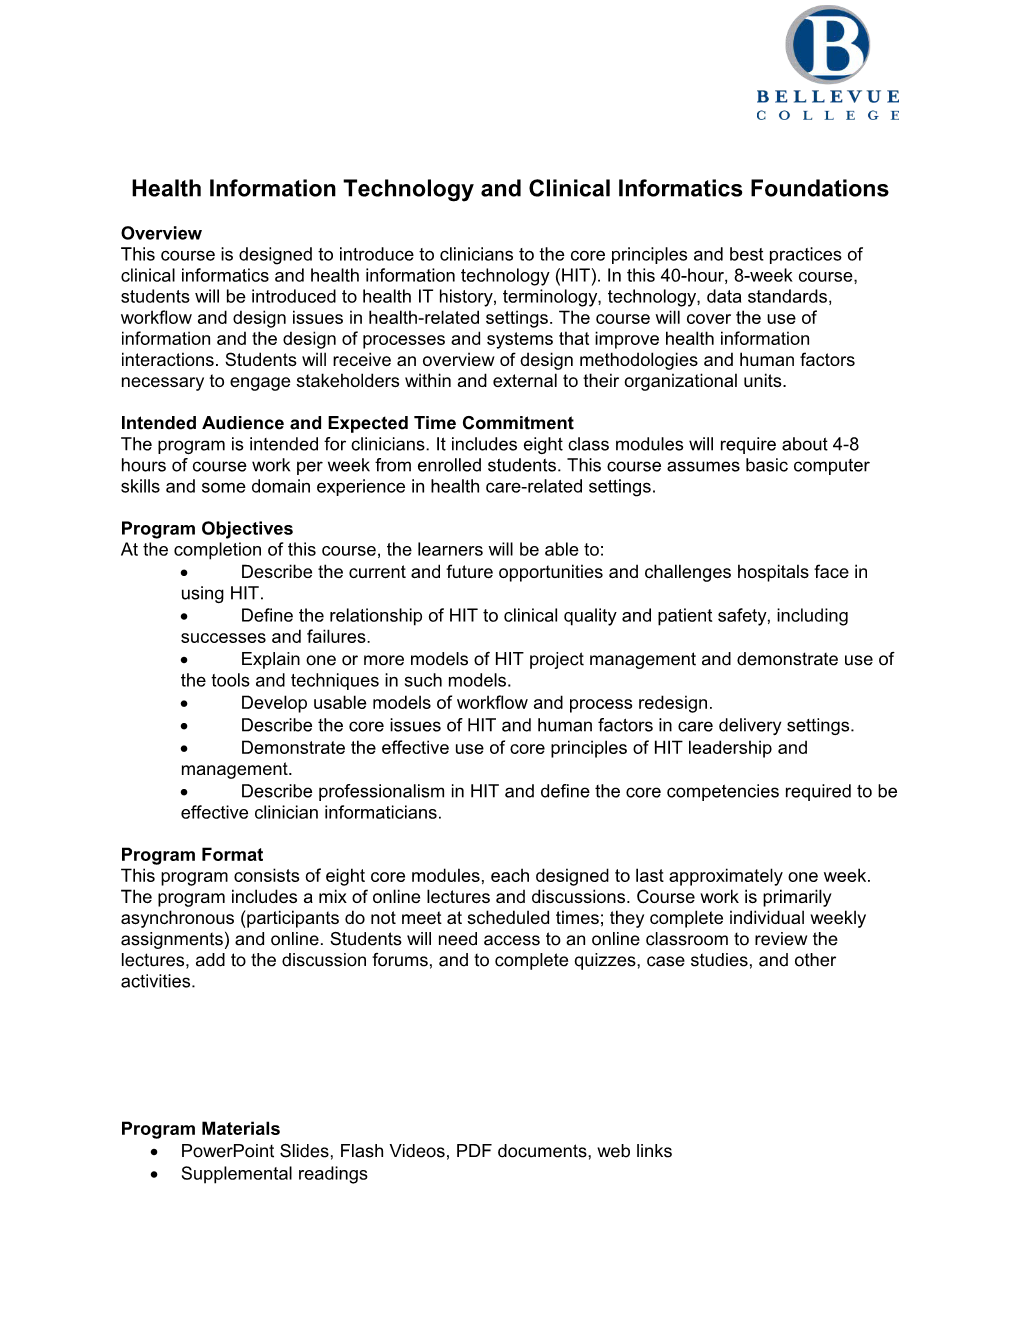 Health Information Technology and Clinical Informatics Foundations